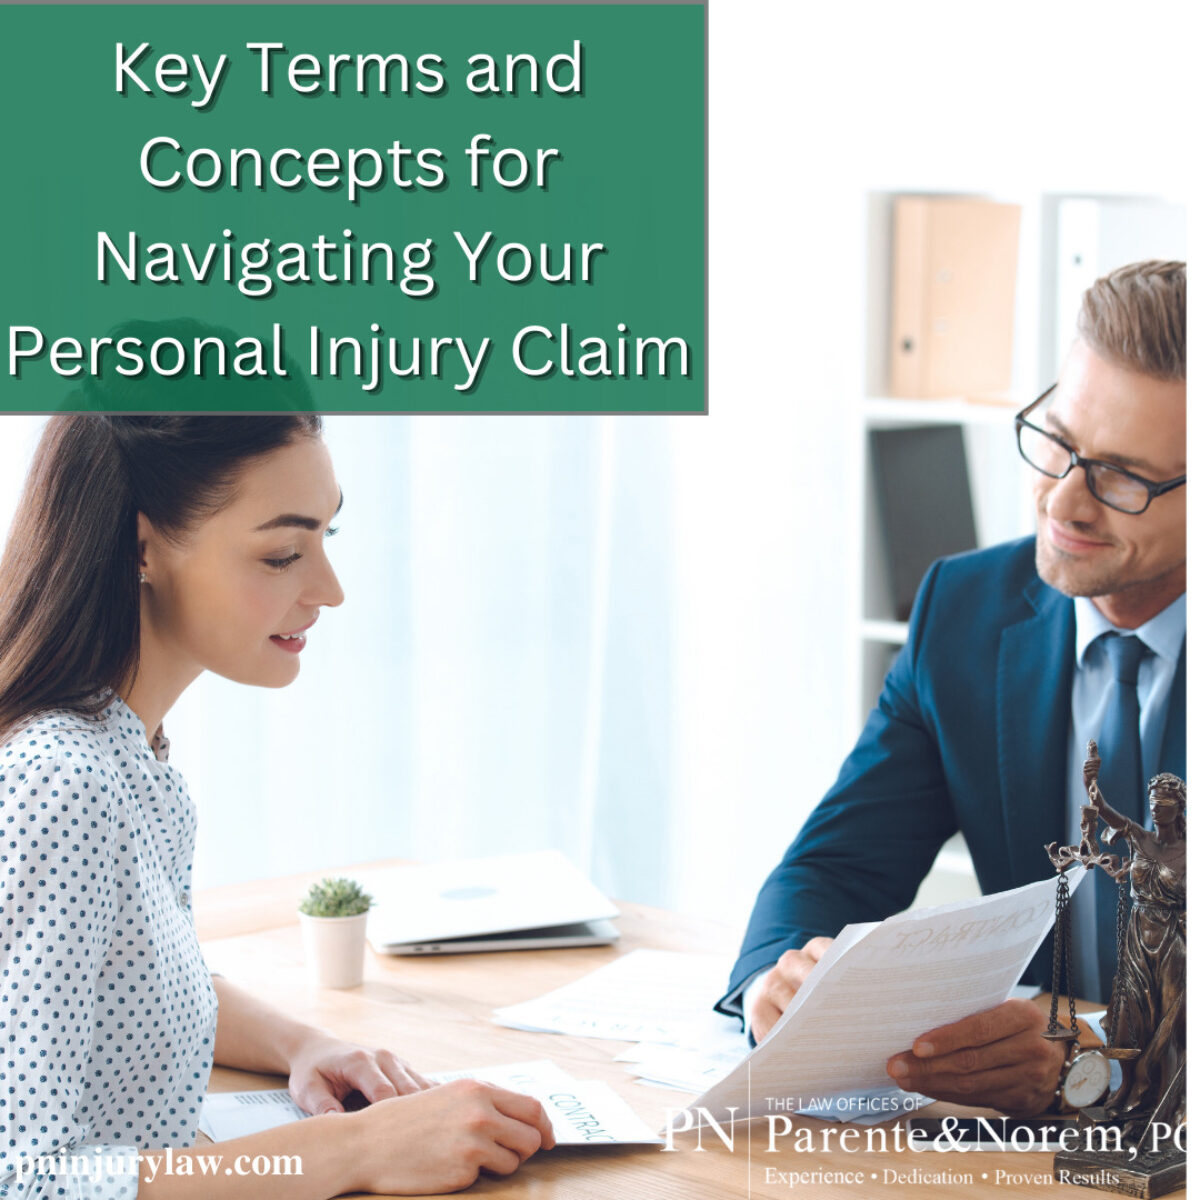 P&N BLOG | Key Terms and Concepts for Navigating Your Personal Injury Claim